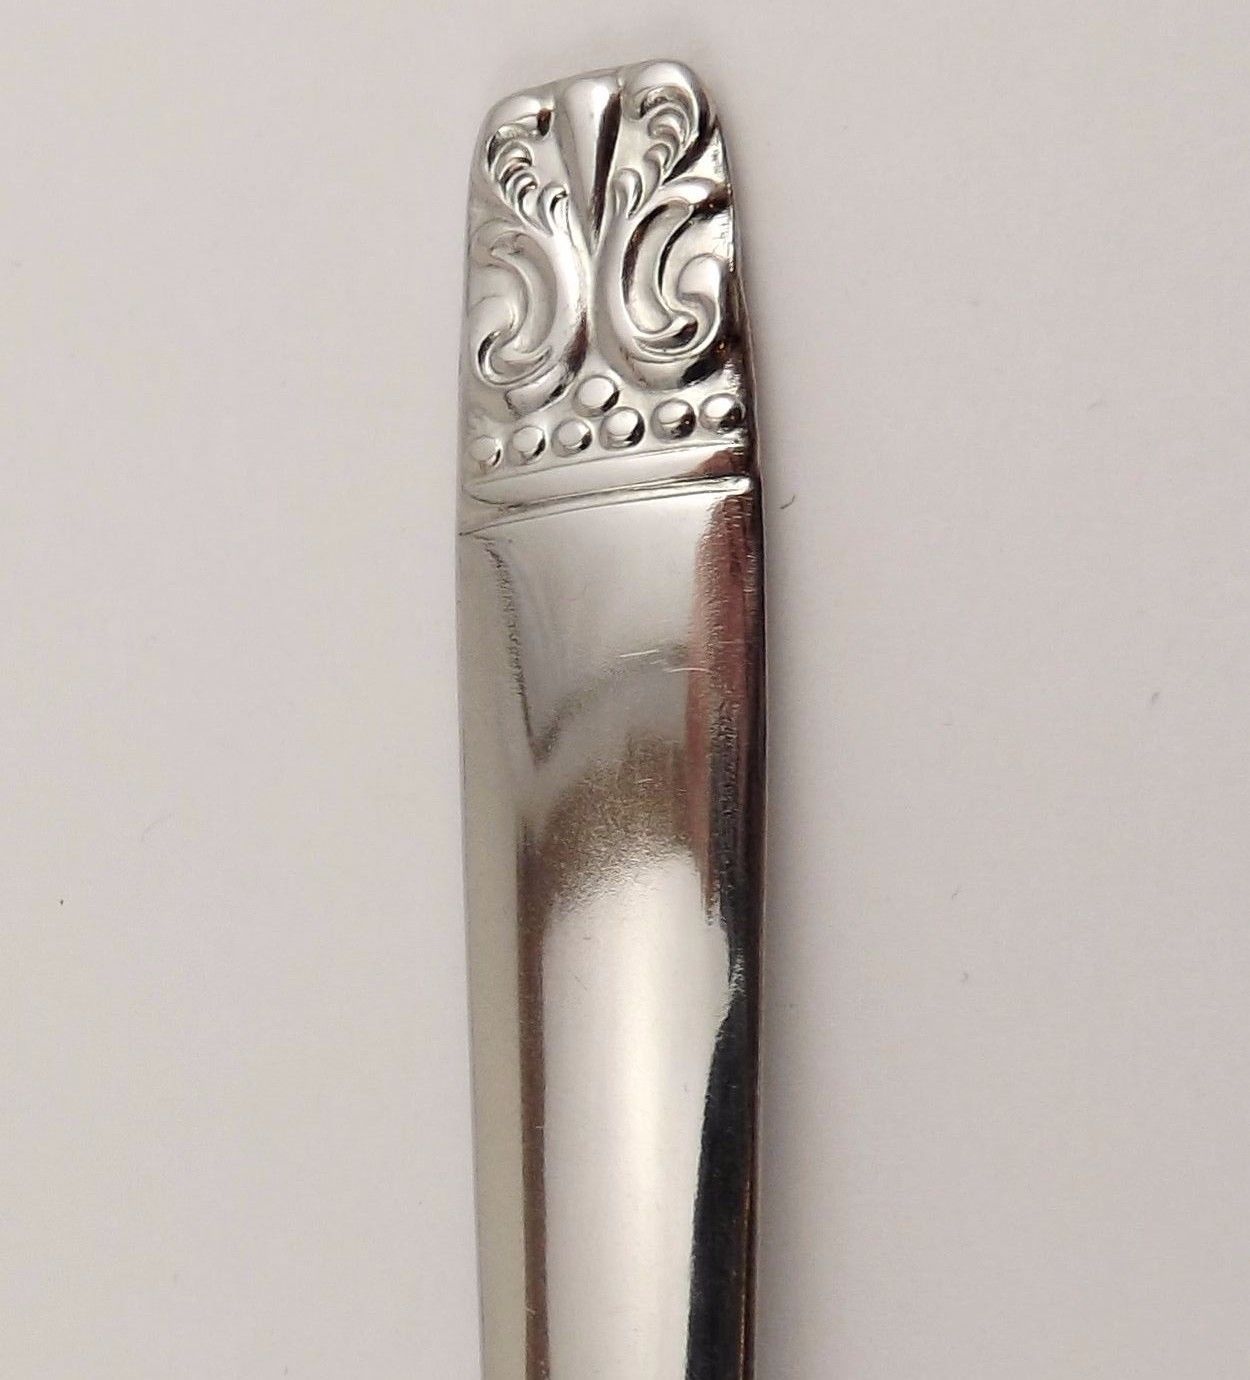 Primary image for Oneida Wm Rogers Aztec Encore Pierced Serving Spoon Stainless 7 3/4"